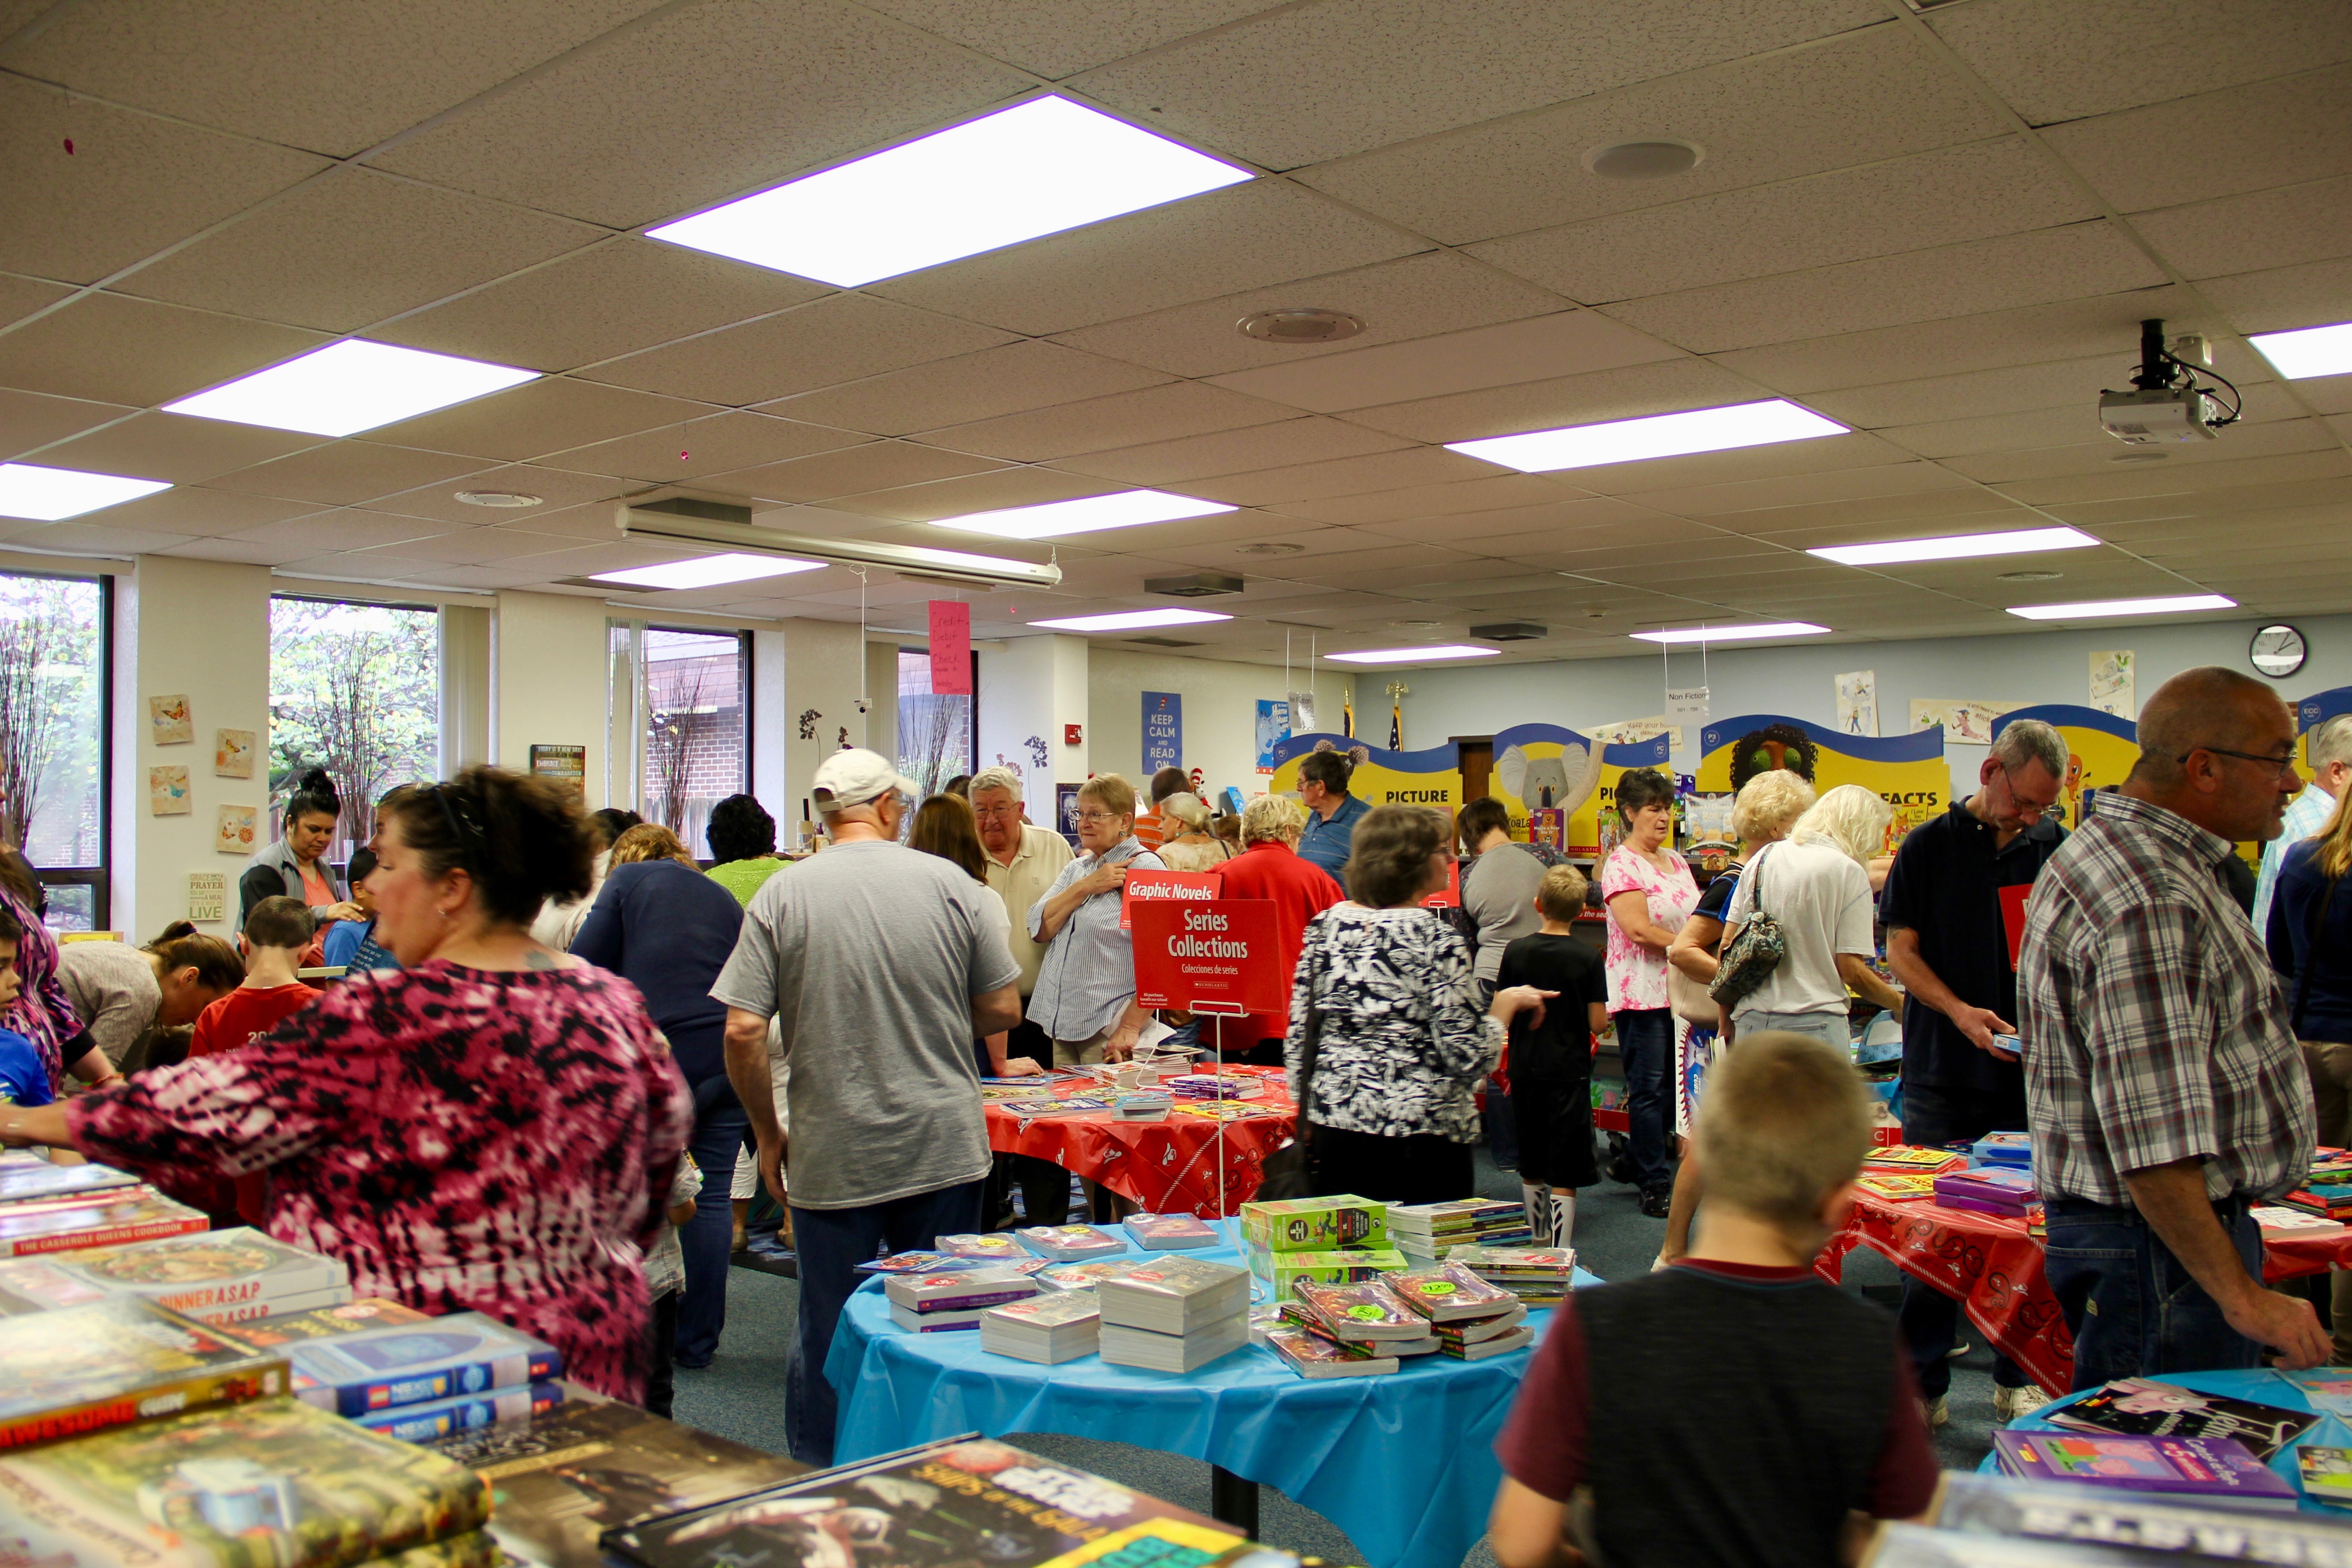 VIP guests and students shopping at the book fair that was hosted in the library.